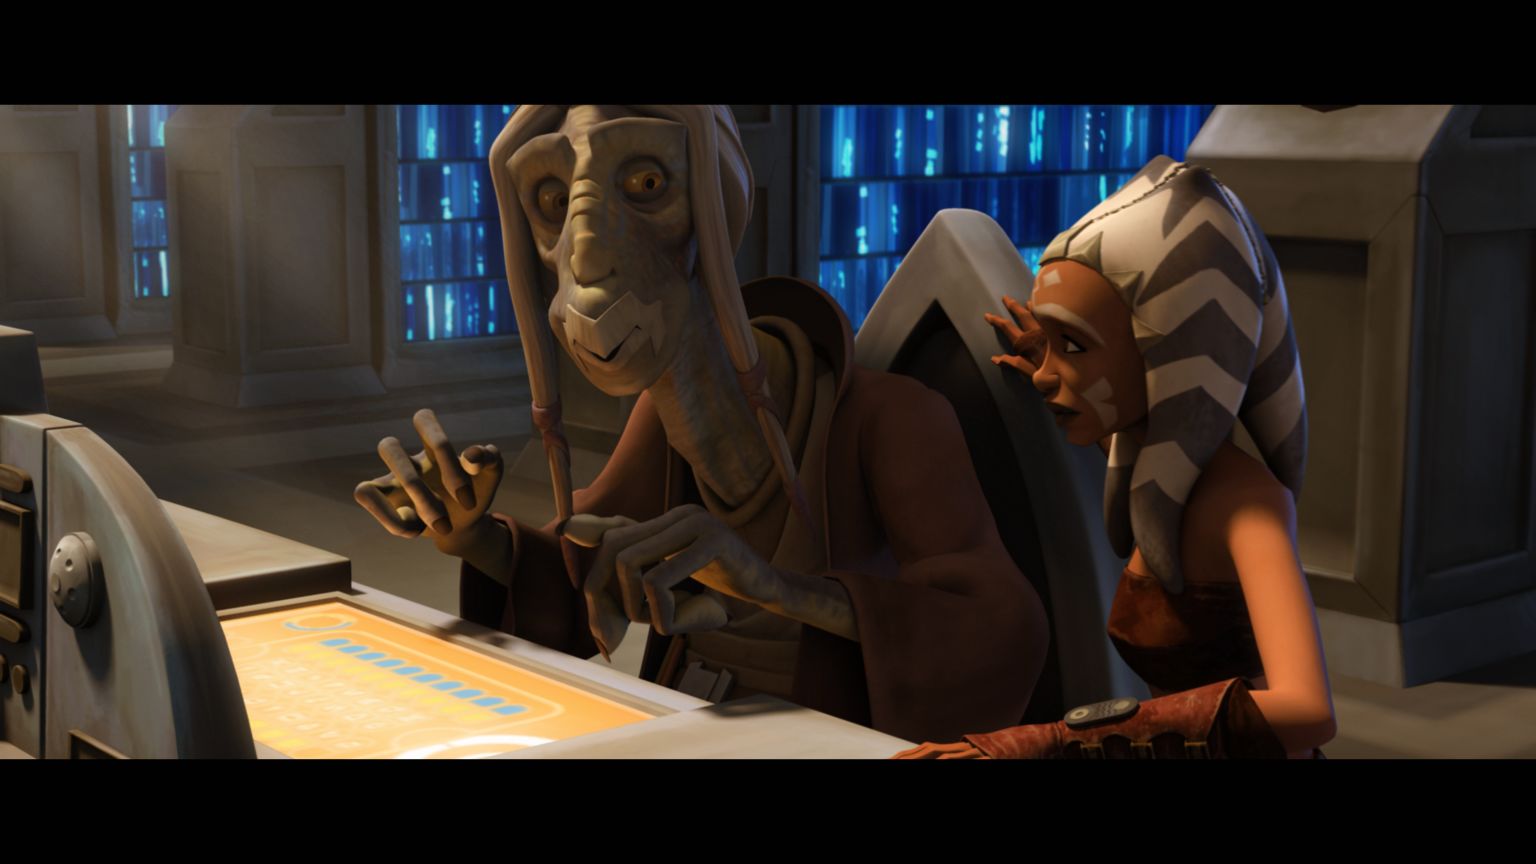 Ahsoka Tano realizes that her Jedi weapon has been stolen in “Lightsaber Lost,” an all-new episode of STAR WARS: THE CLONE WARS premiering at 9:00 p.m. ET/PT Friday, January 22 on Cartoon Network. TM & © 2010 Lucasfilm Ltd. All rights reserved. 